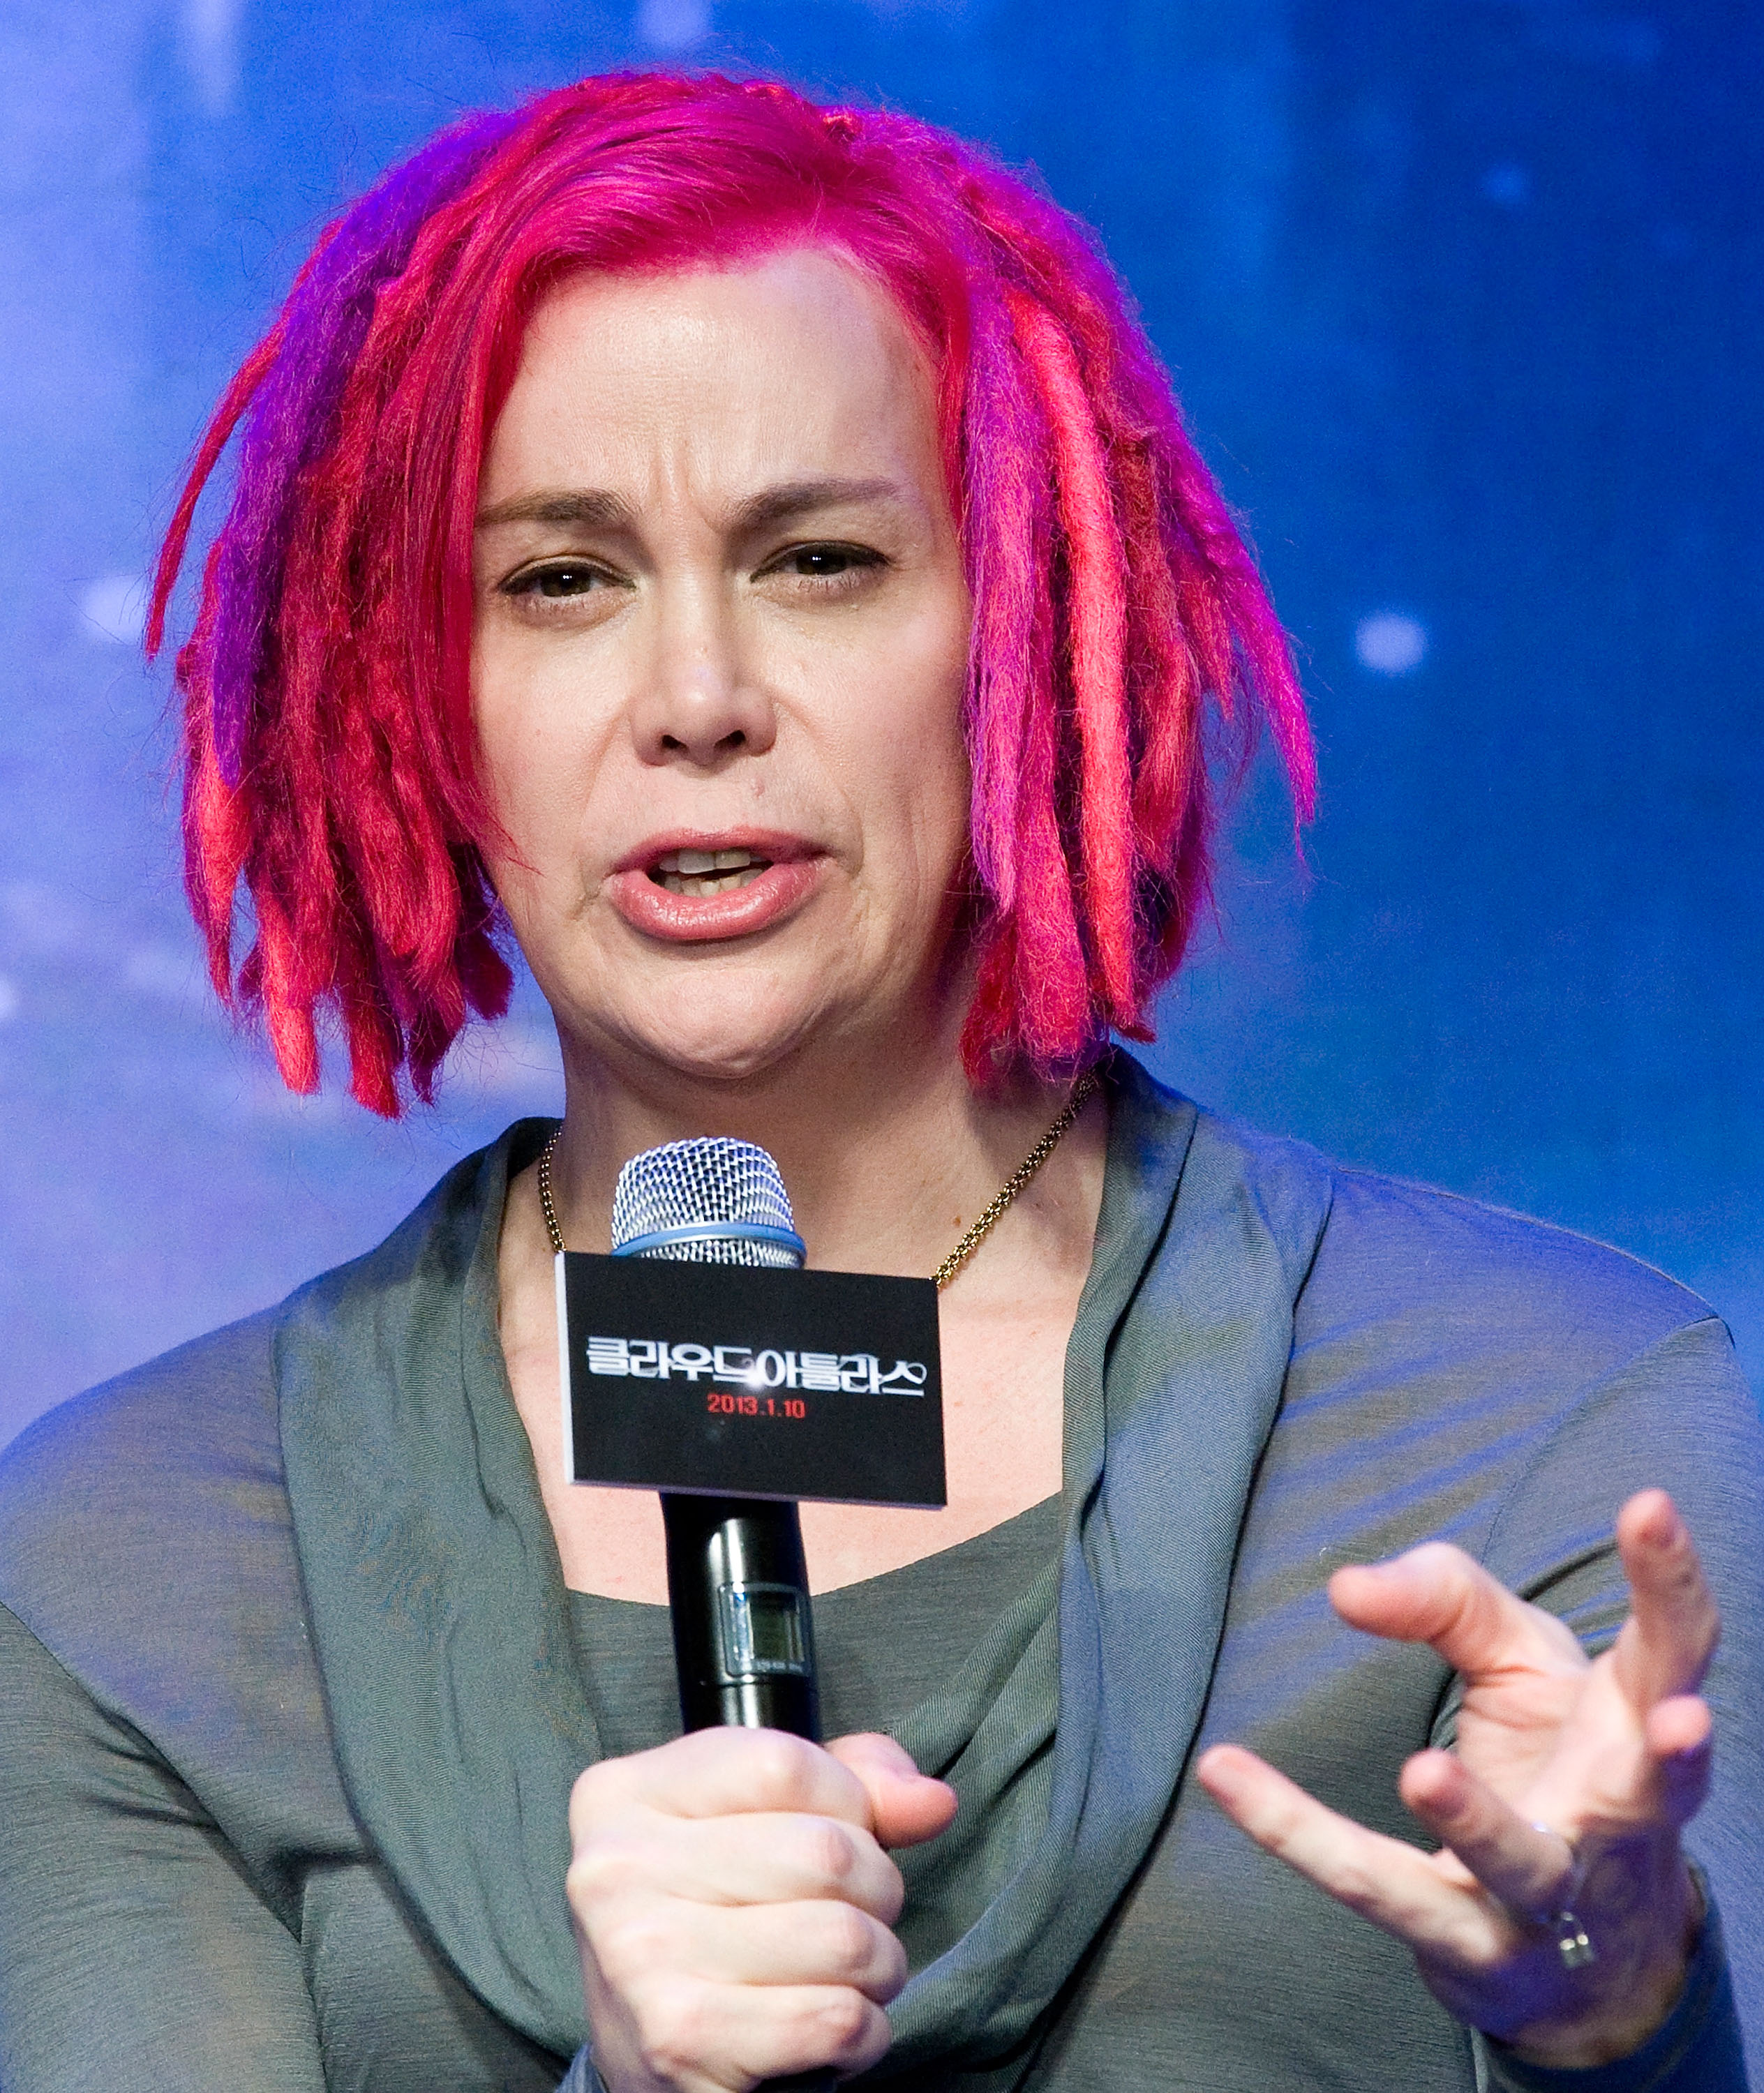 Lana Wachowski speaks during the "Cloud Atlas" press conference at Sheraton Walkerhill Hotel on December 13, 2012 in Seoul, South Korea.